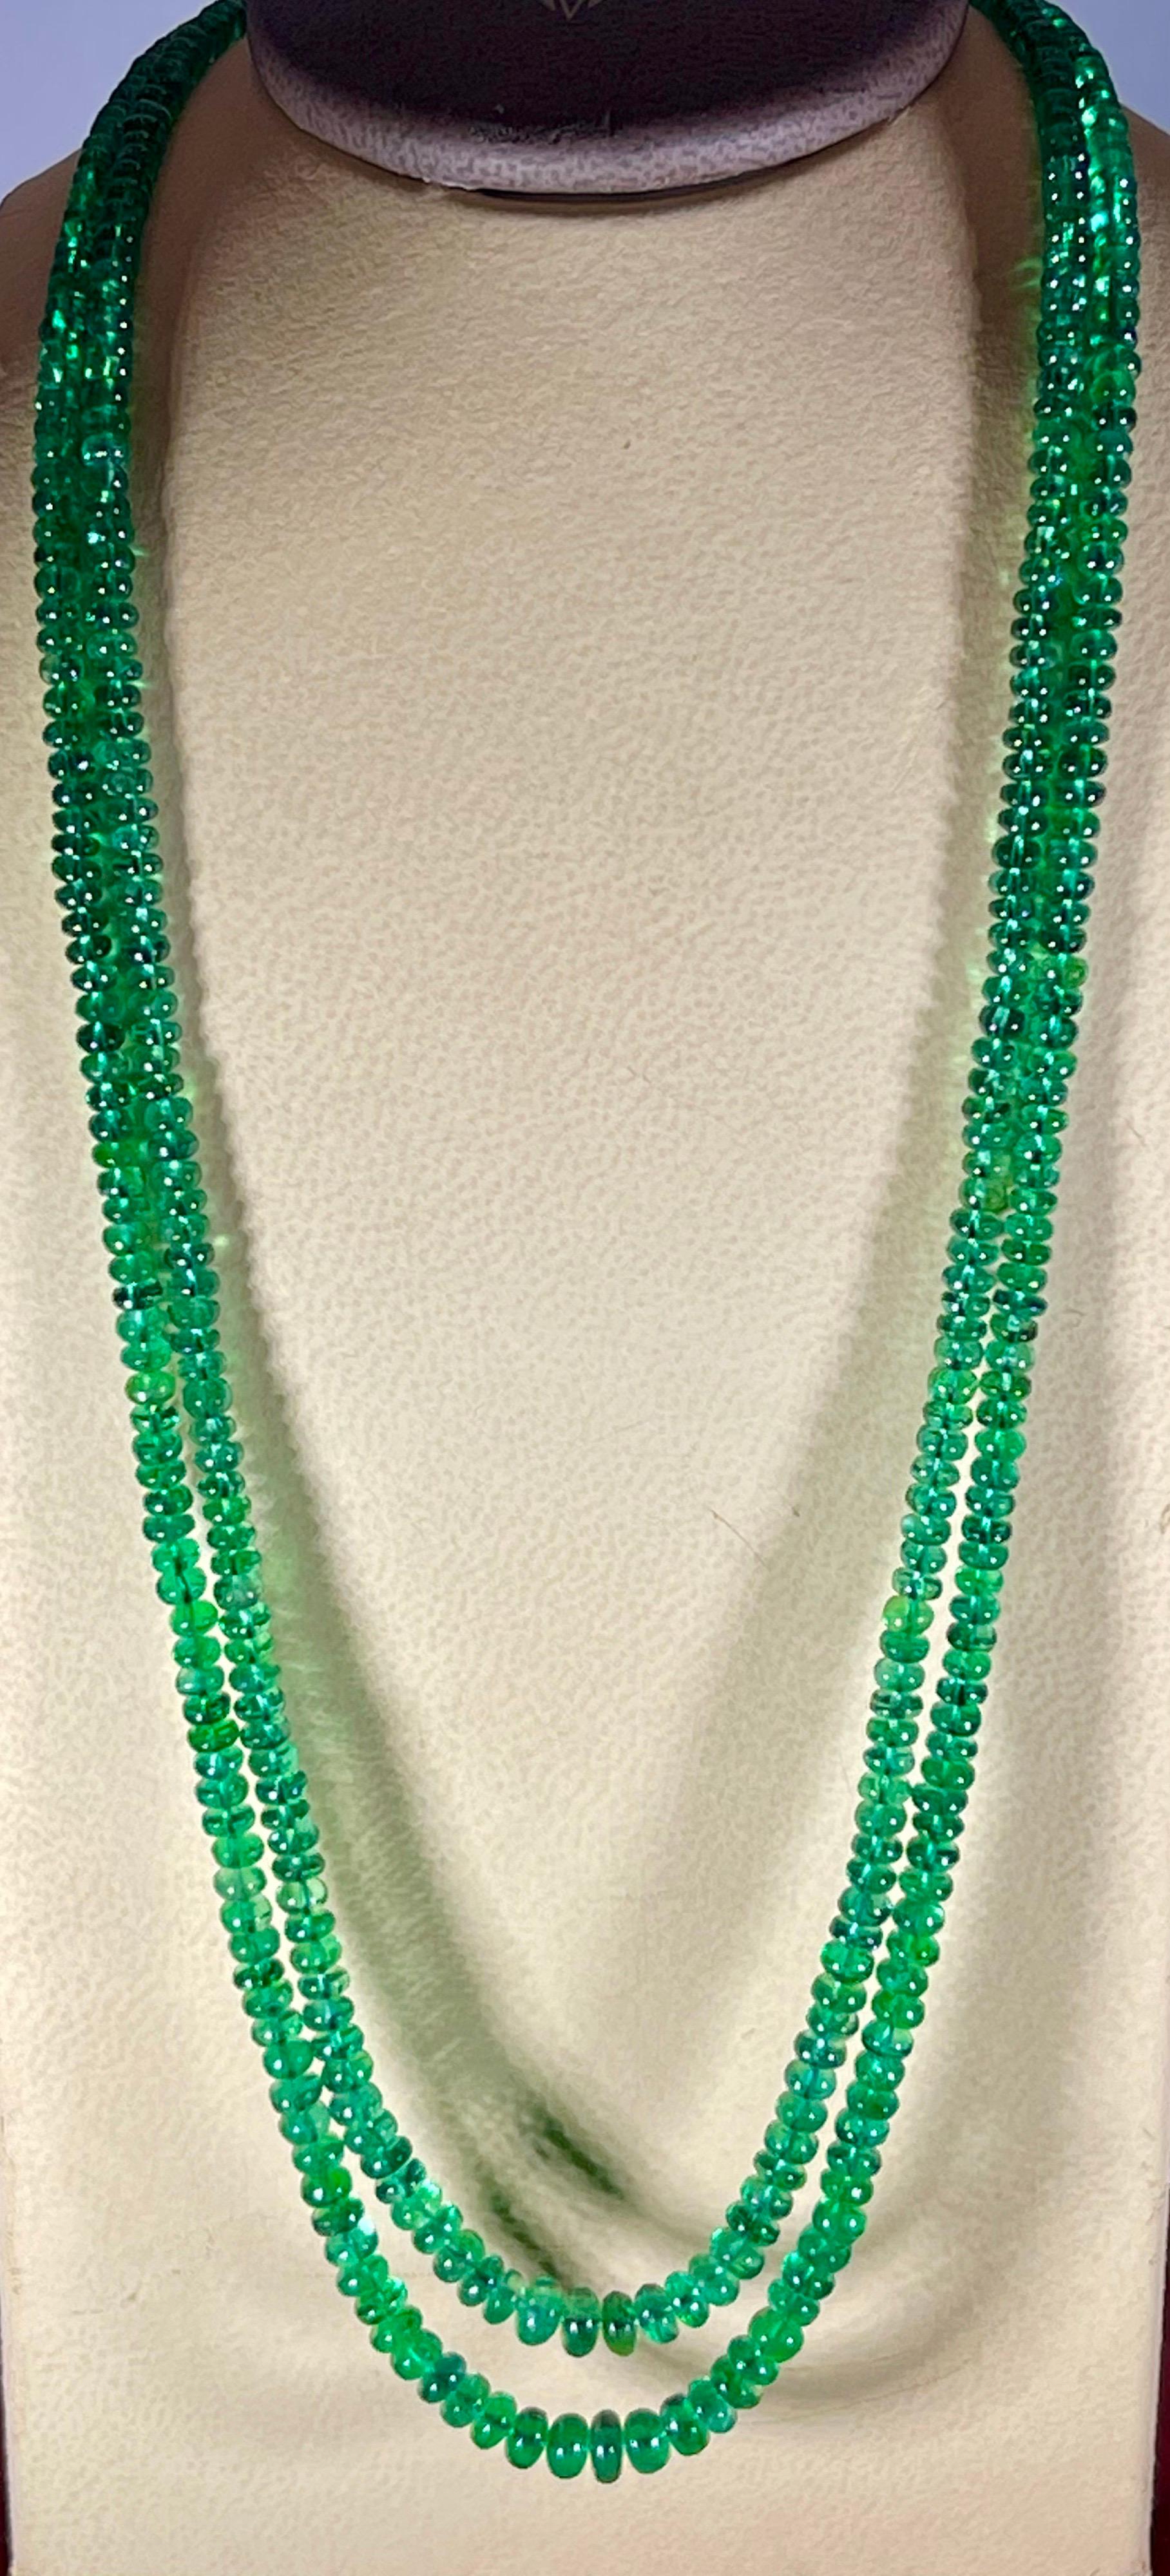 125ct Fine Emerald Beads 2 Line Necklace with 14 Kt Yellow Gold Clasp Adjustable 7